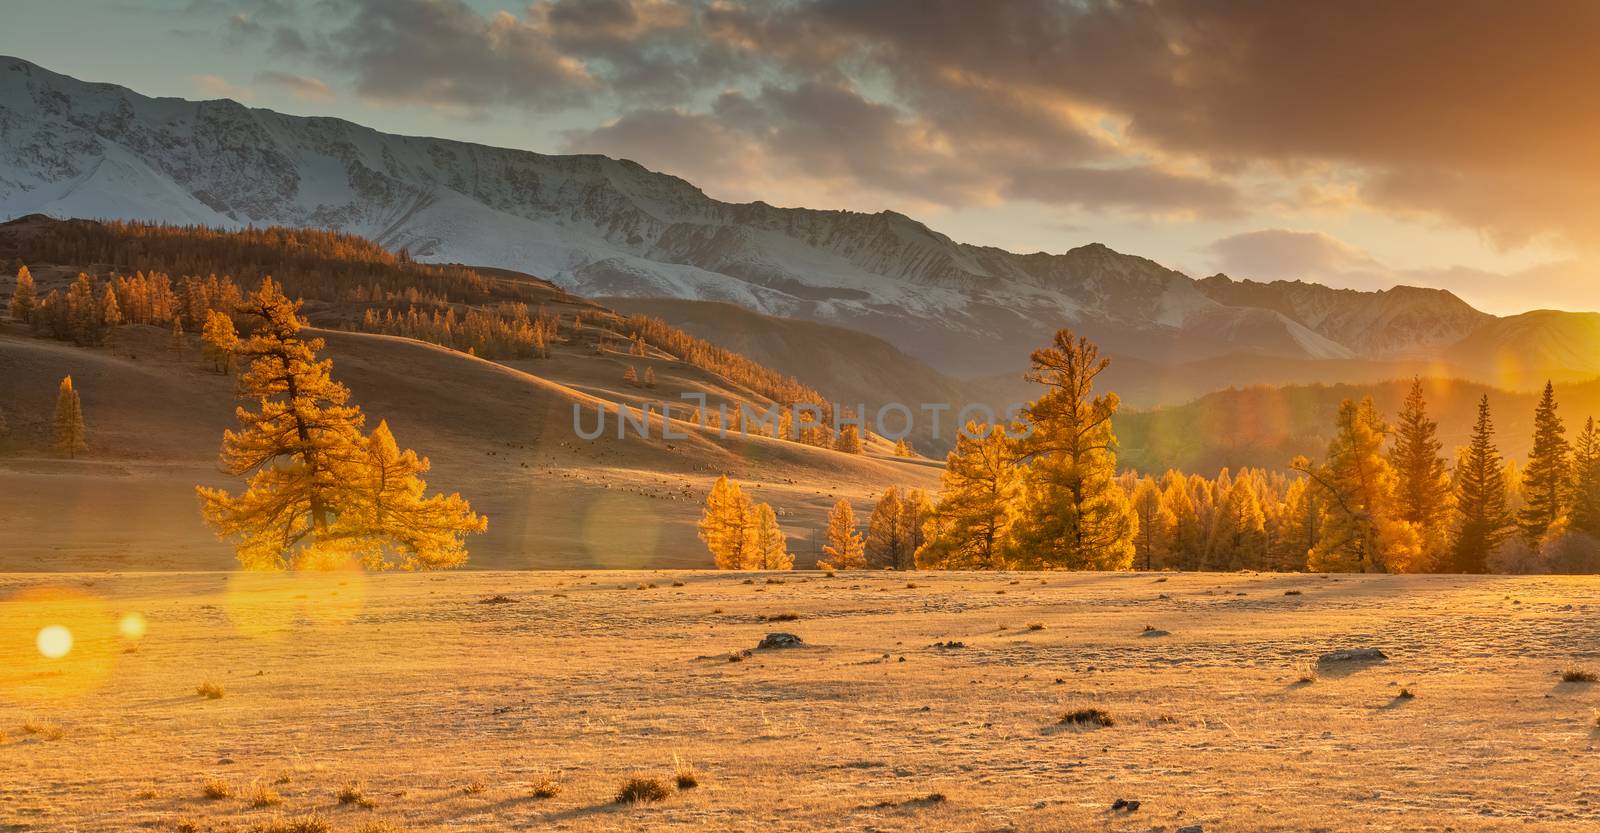 Beautiful panorama of a valley full of golden trees in the foreground and white snowy mountains in the background. Fall time. Cloudy sunset sky. Lense flares. Altai mountains, Russia. Golden hour by DamantisZ